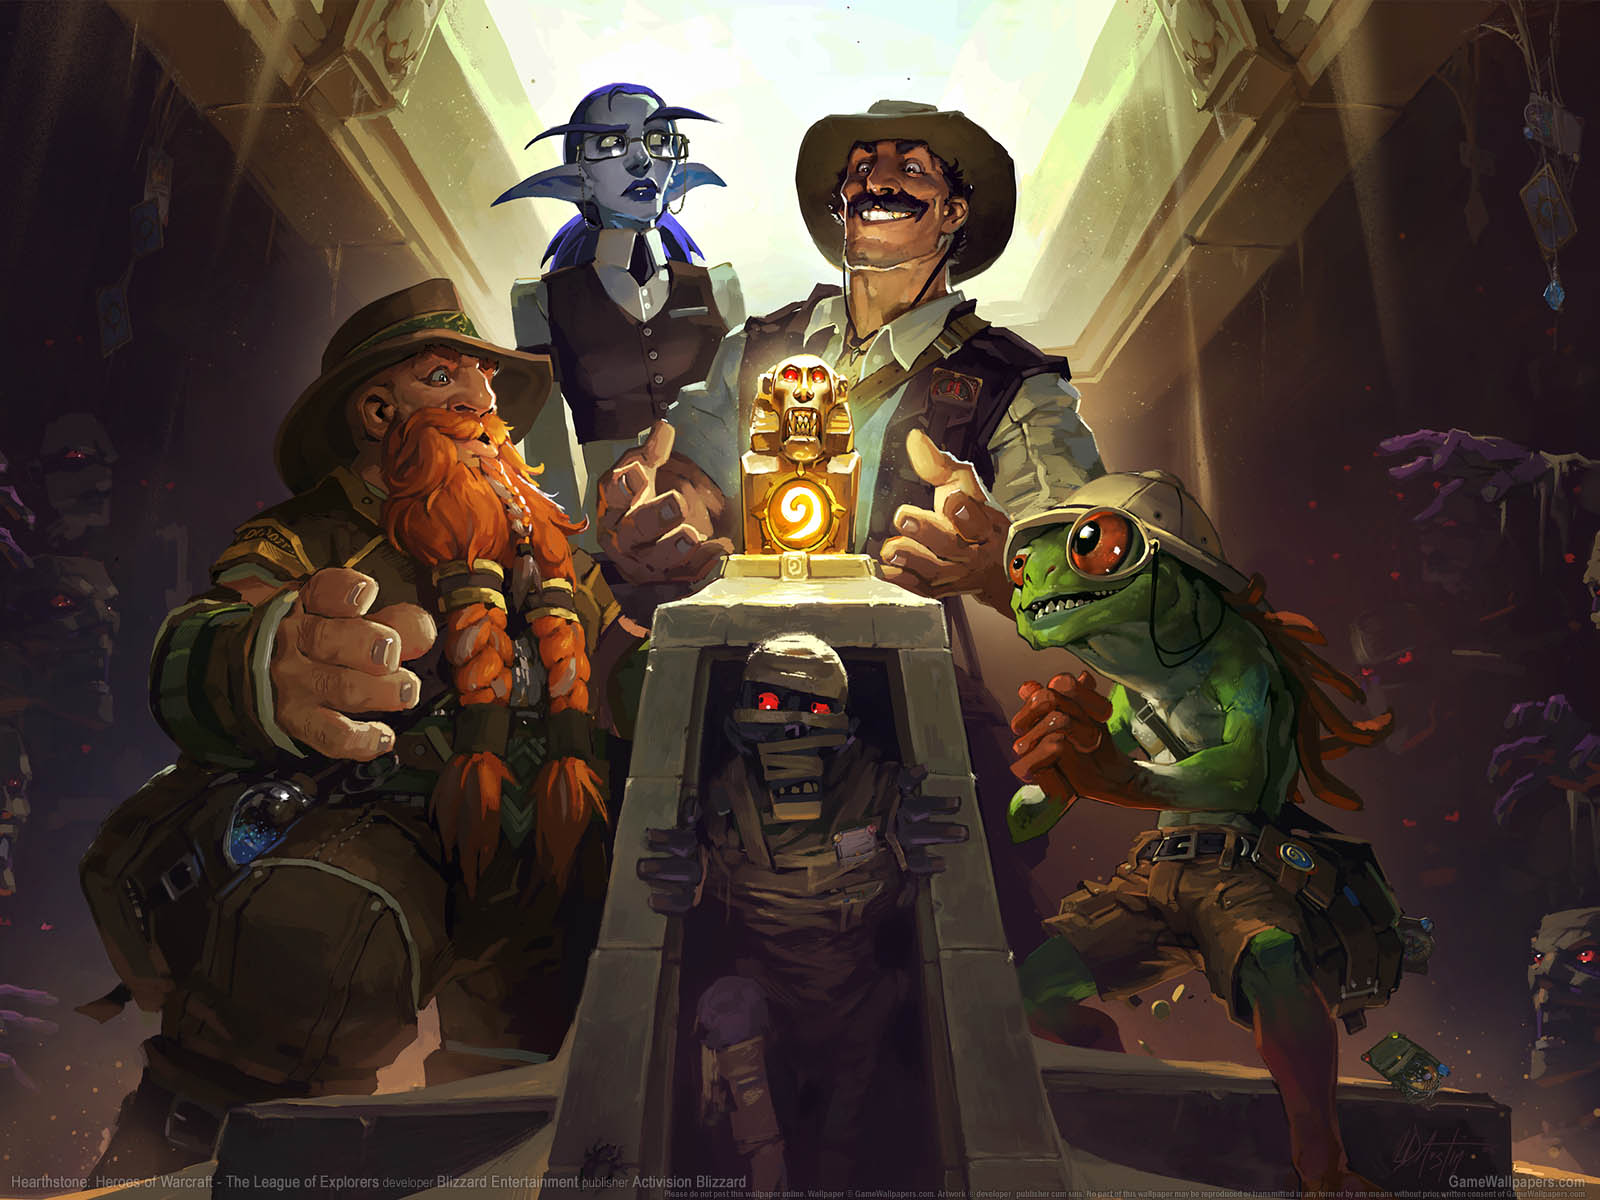 Hearthstone%3A Heroes of Warcraft - The League of Explorers wallpaper 01 1600x1200